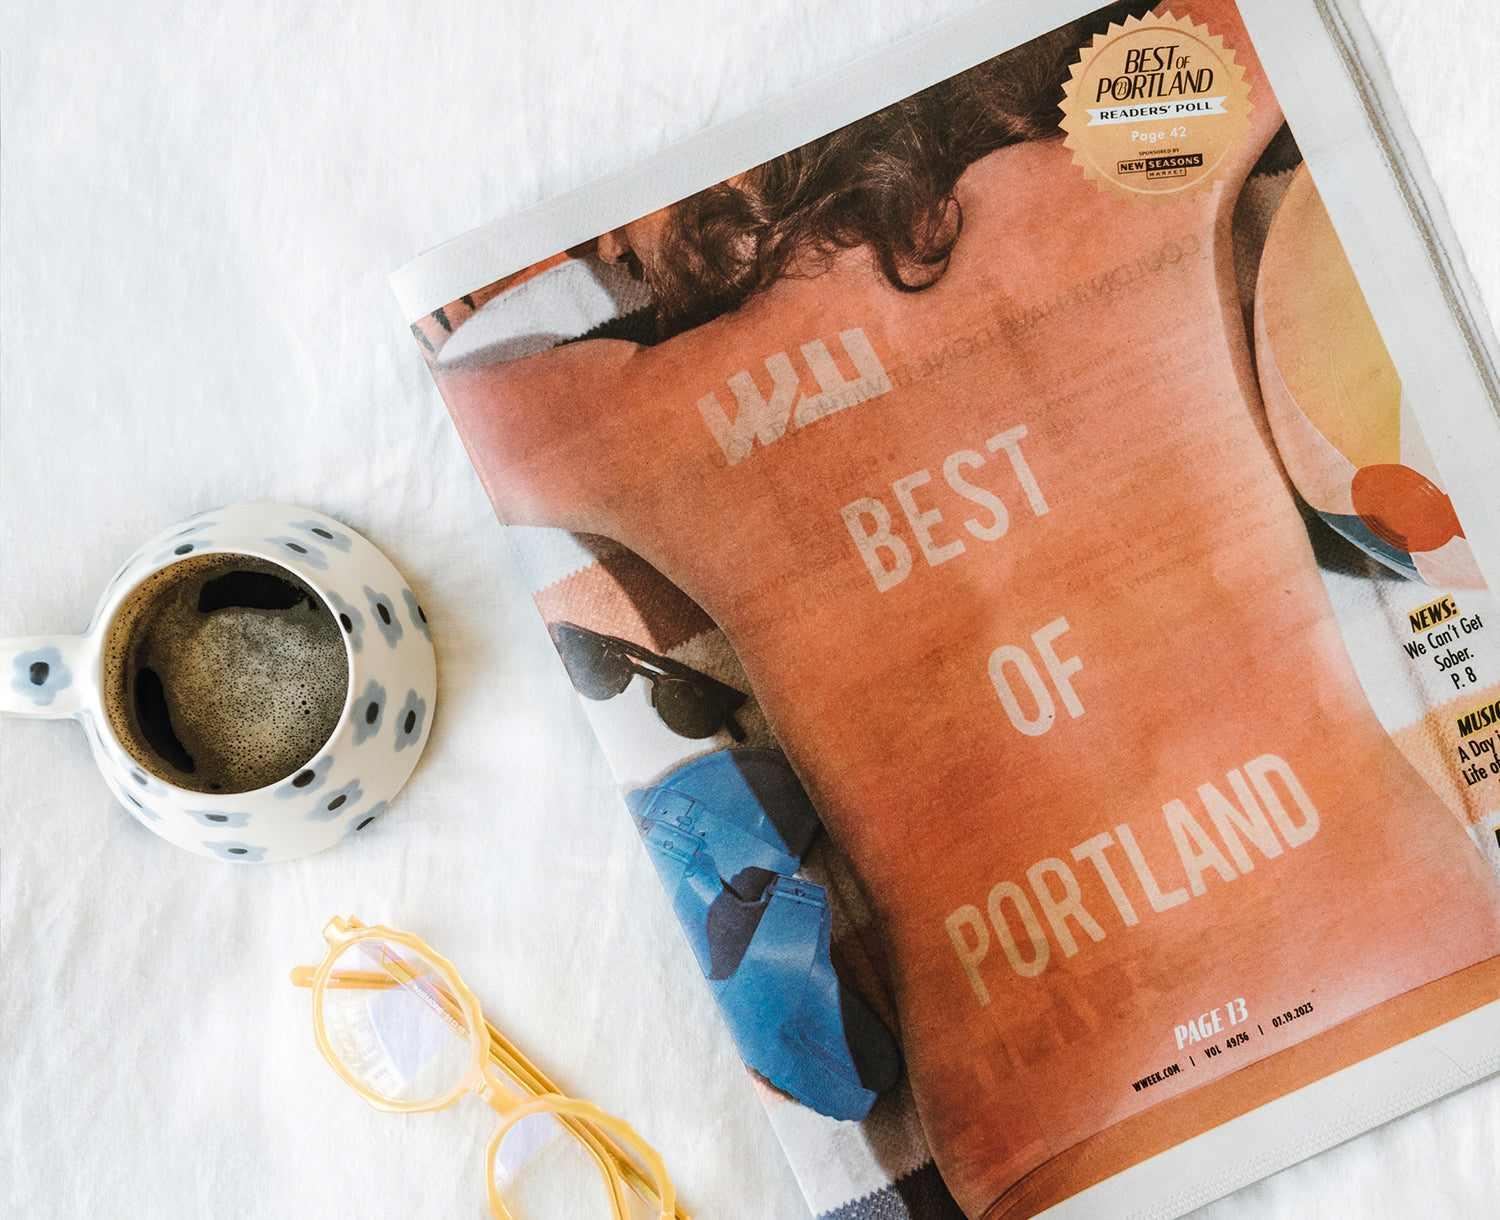 Willamette Week's Best of Portland Issue on a white blanket next to a mug of coffee and reading glasses.